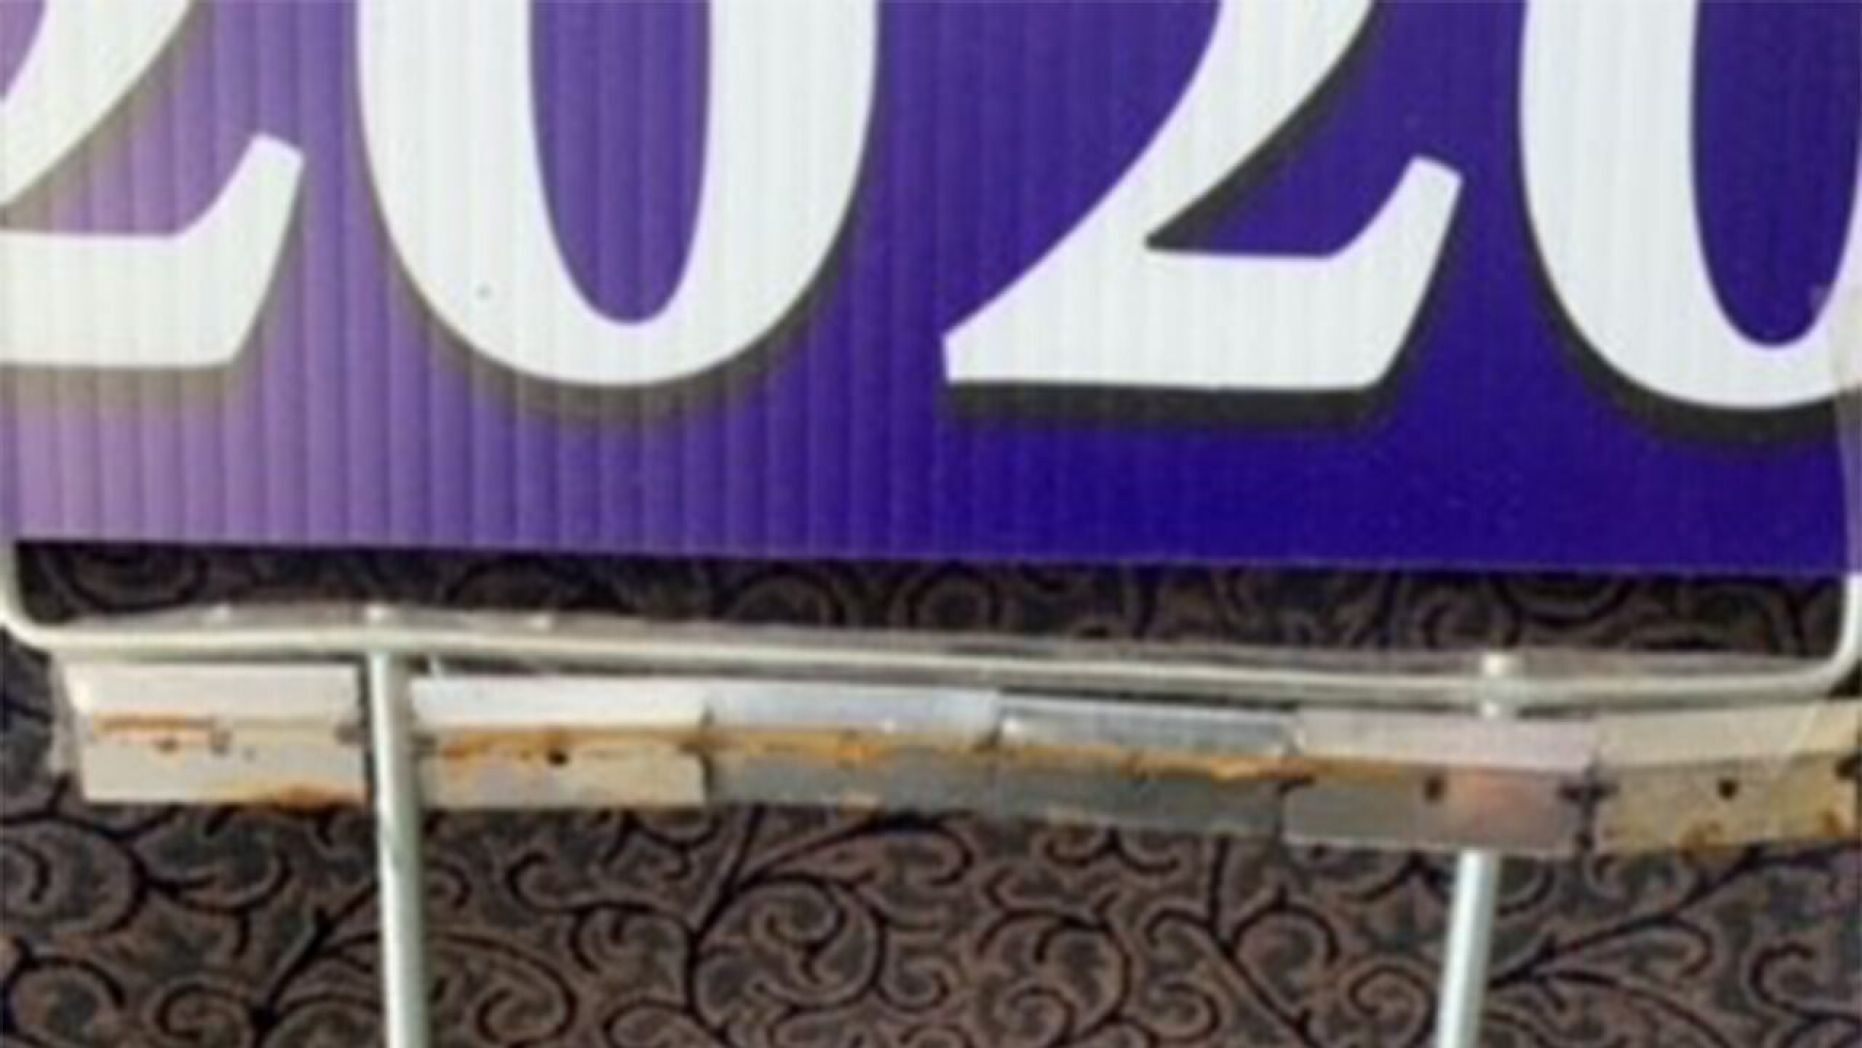 A Trump 2020 sign in Michigan was boobytrapped with razor blades